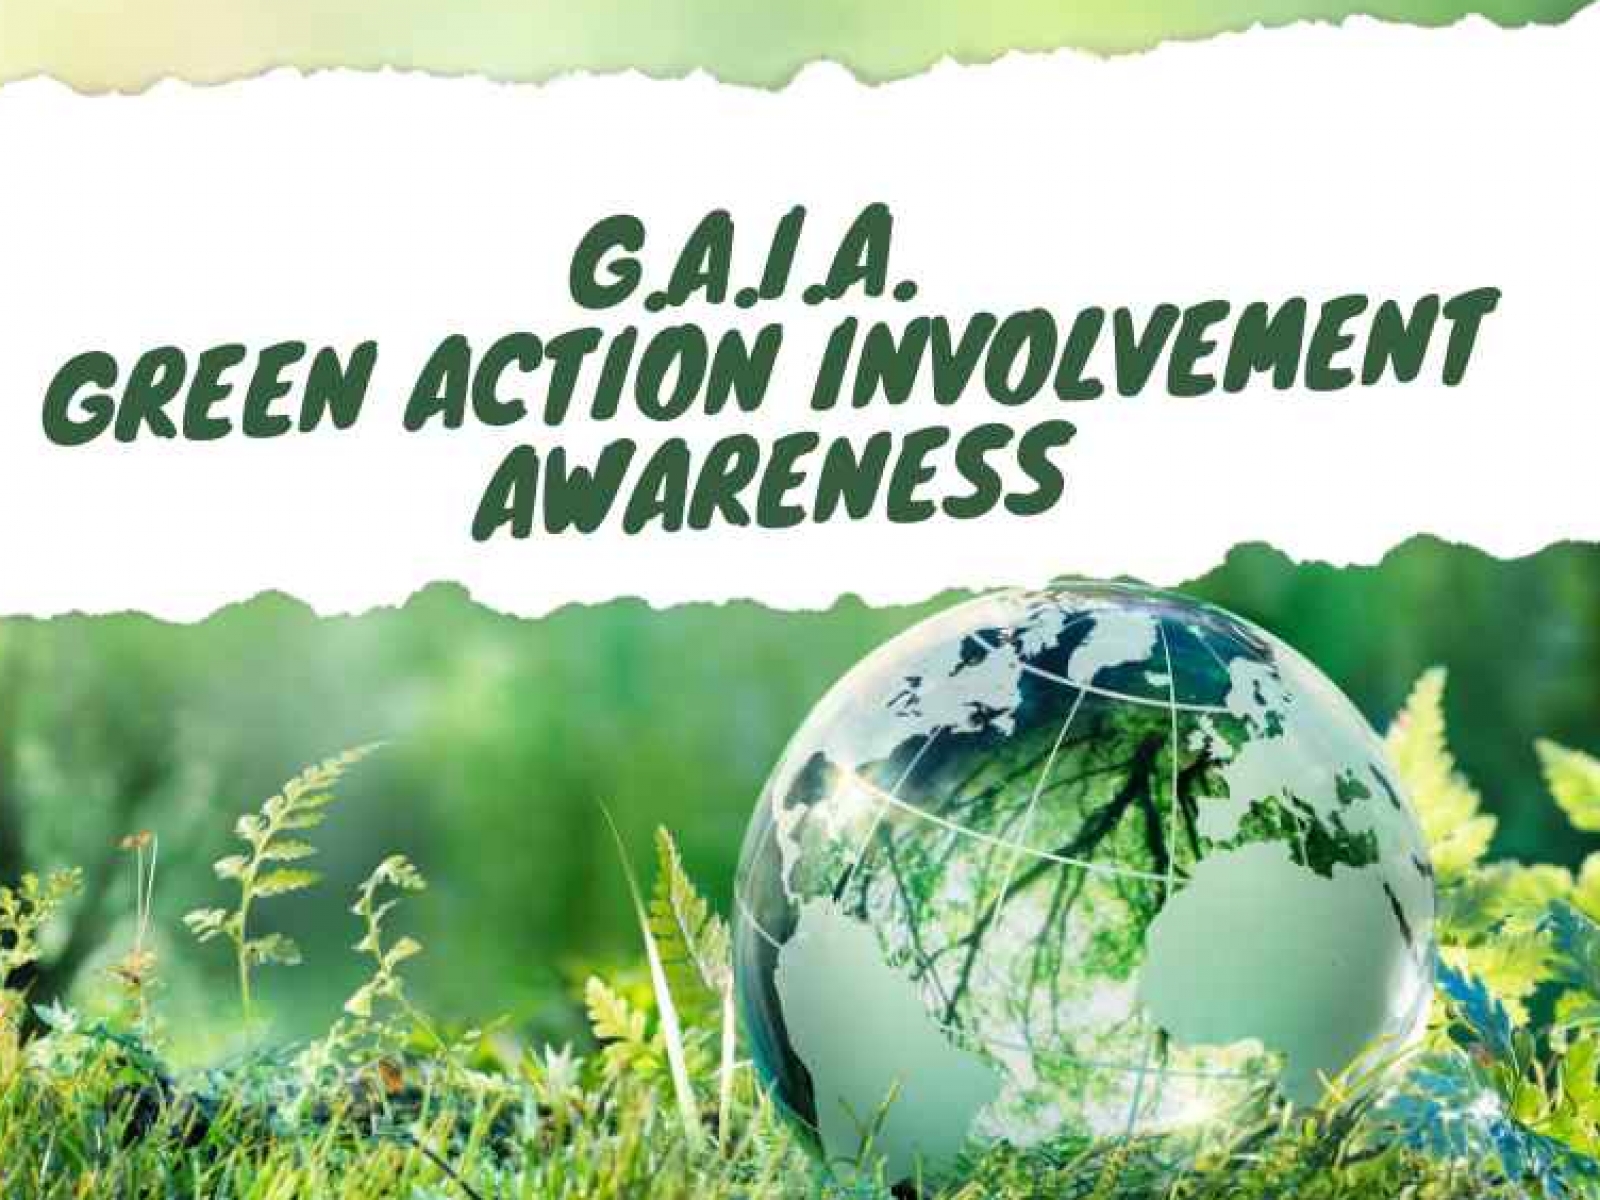 G.A.I.A. – Green Action Initiative Awareness